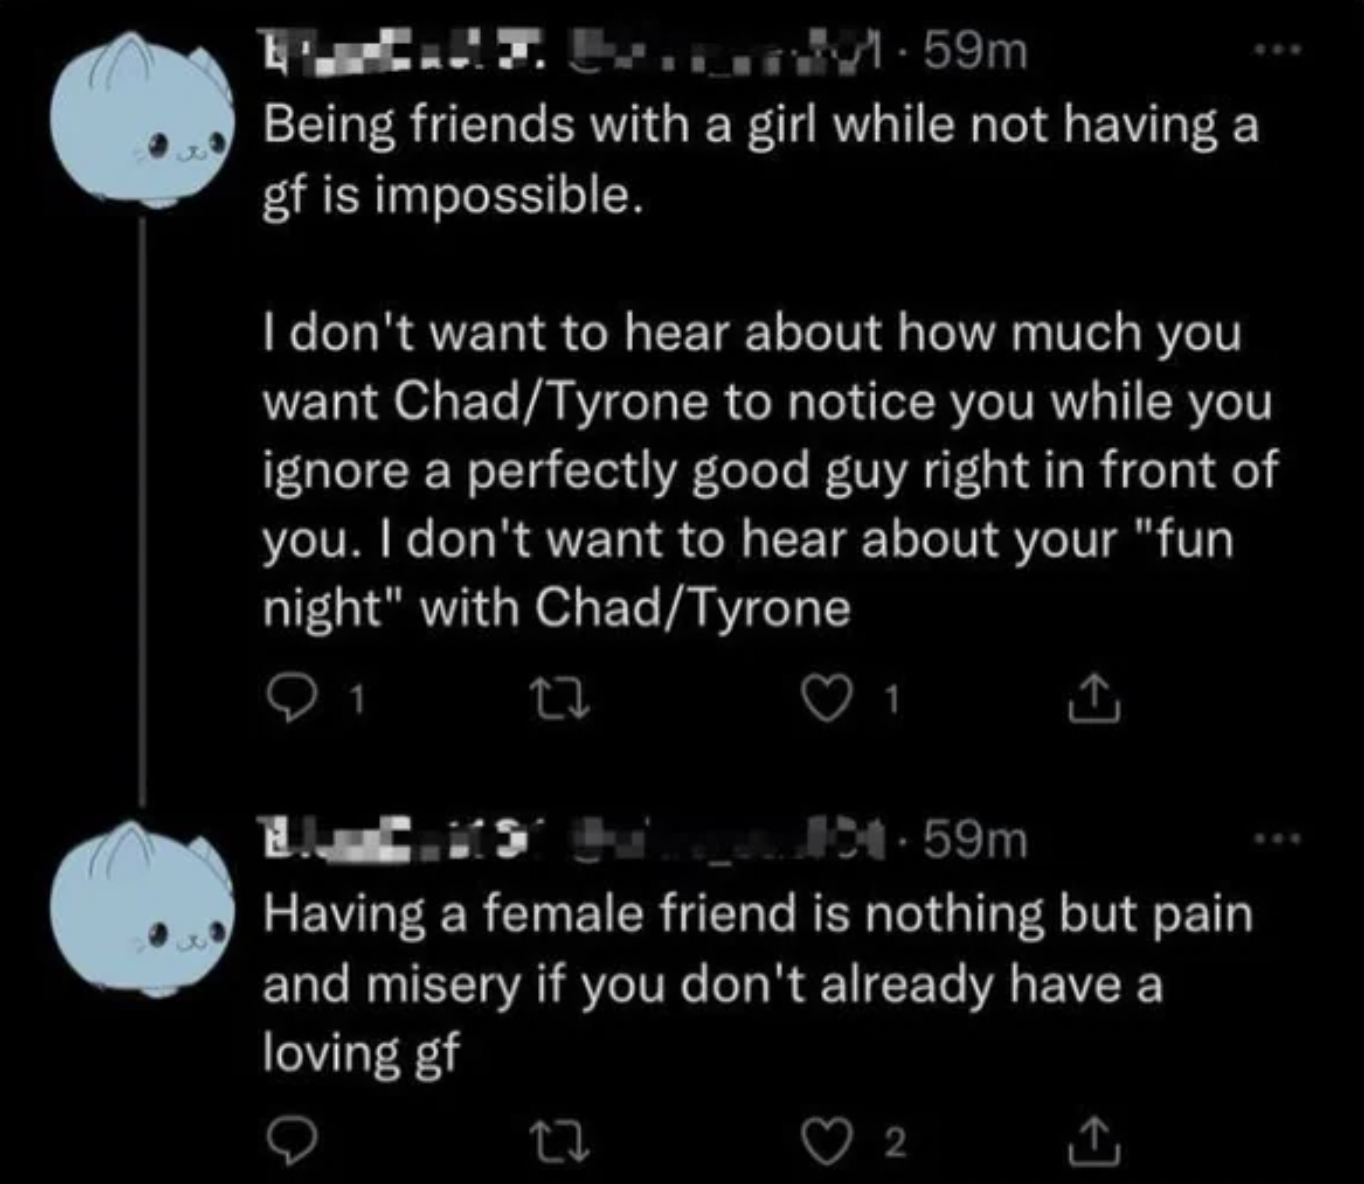 facepalms - atmosphere - 1.59m Being friends with a girl while not having a gf is impossible. I don't want to hear about how much you want ChadTyrone to notice you while you ignore a perfectly good guy right in front of you. I don't want to hear about you